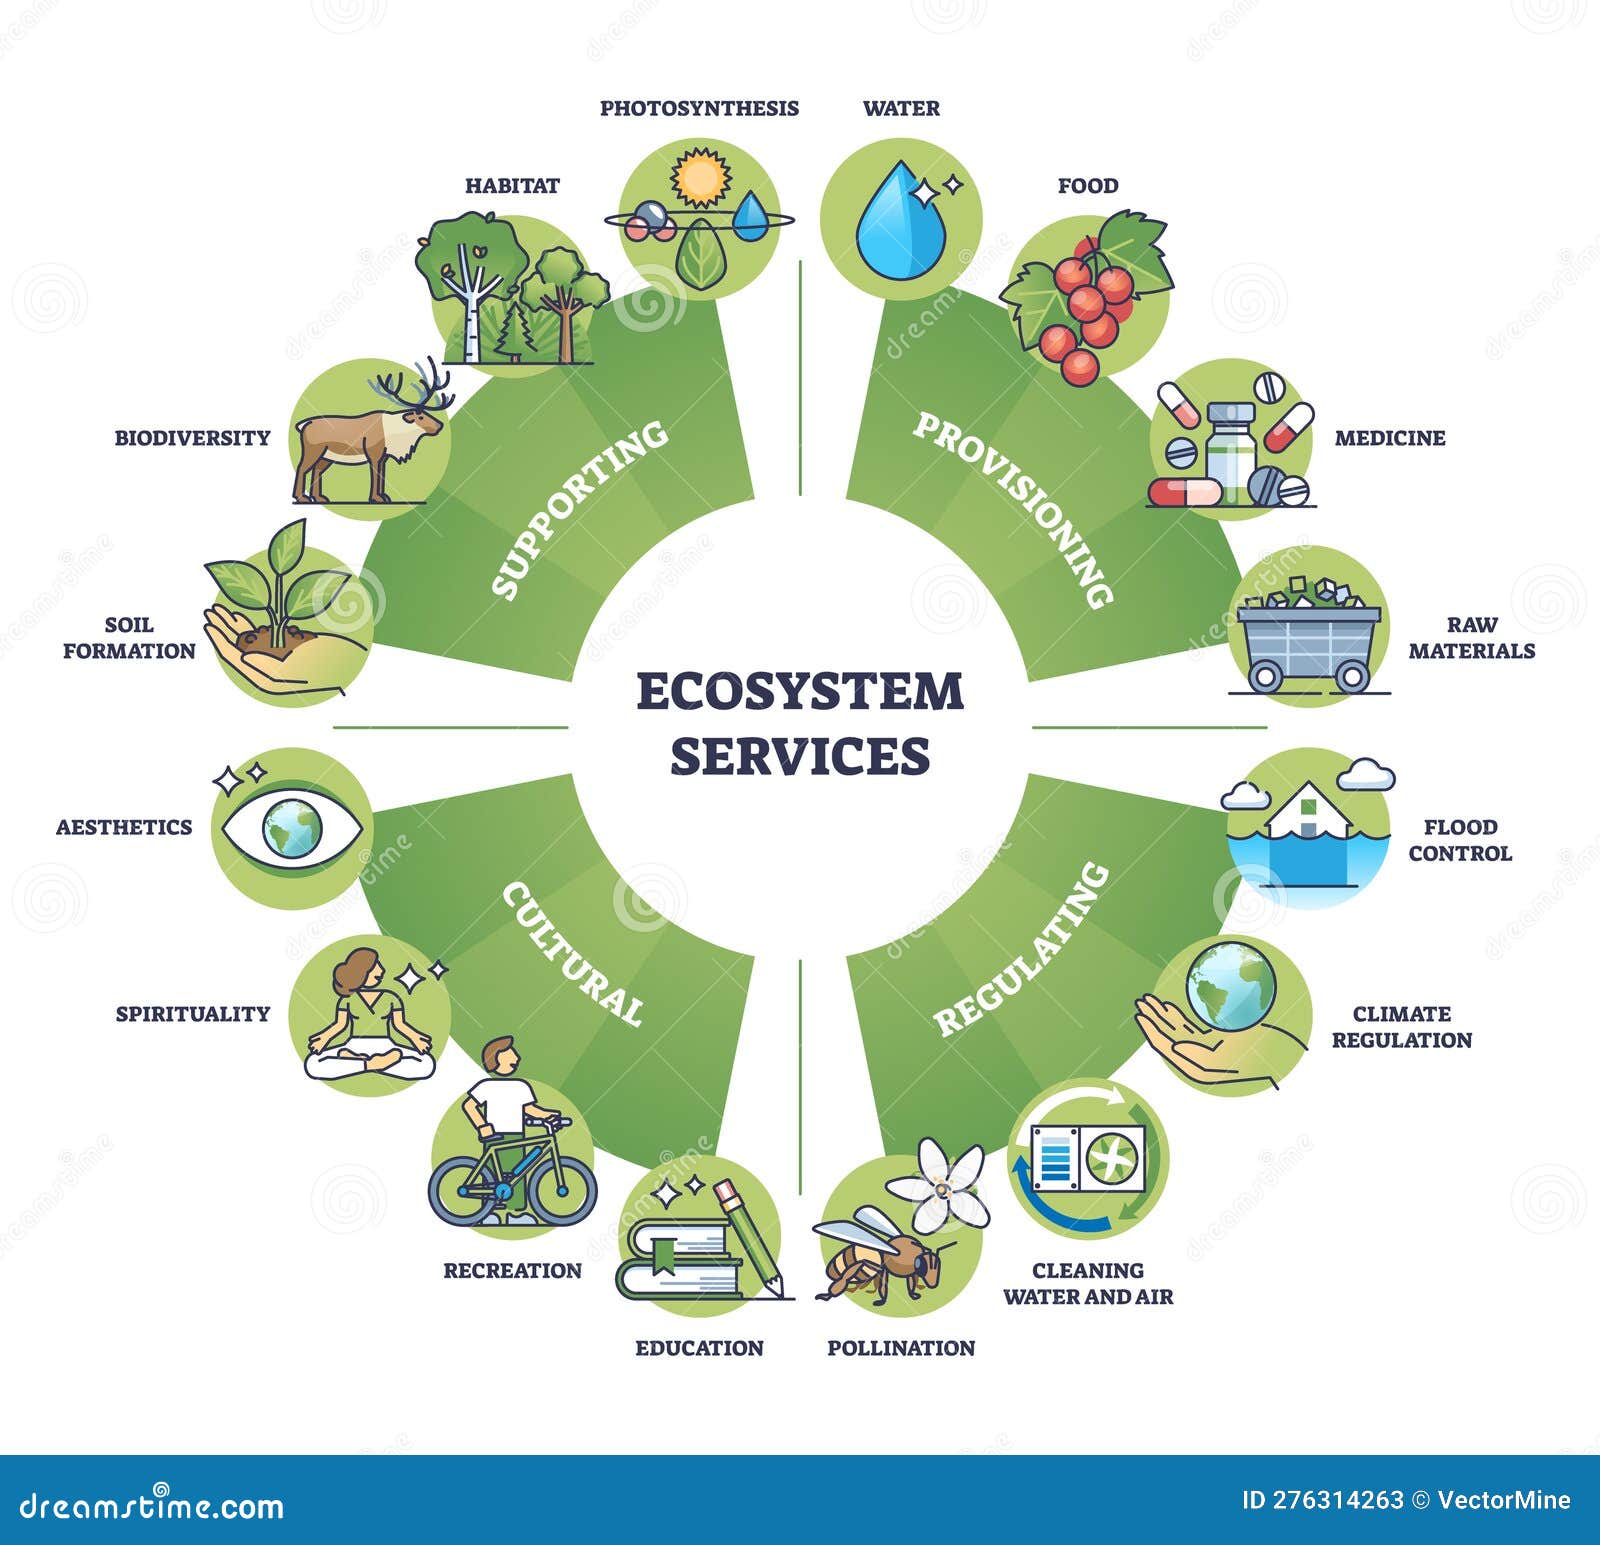 ecosystem services and nature based ecological solutions outline diagram